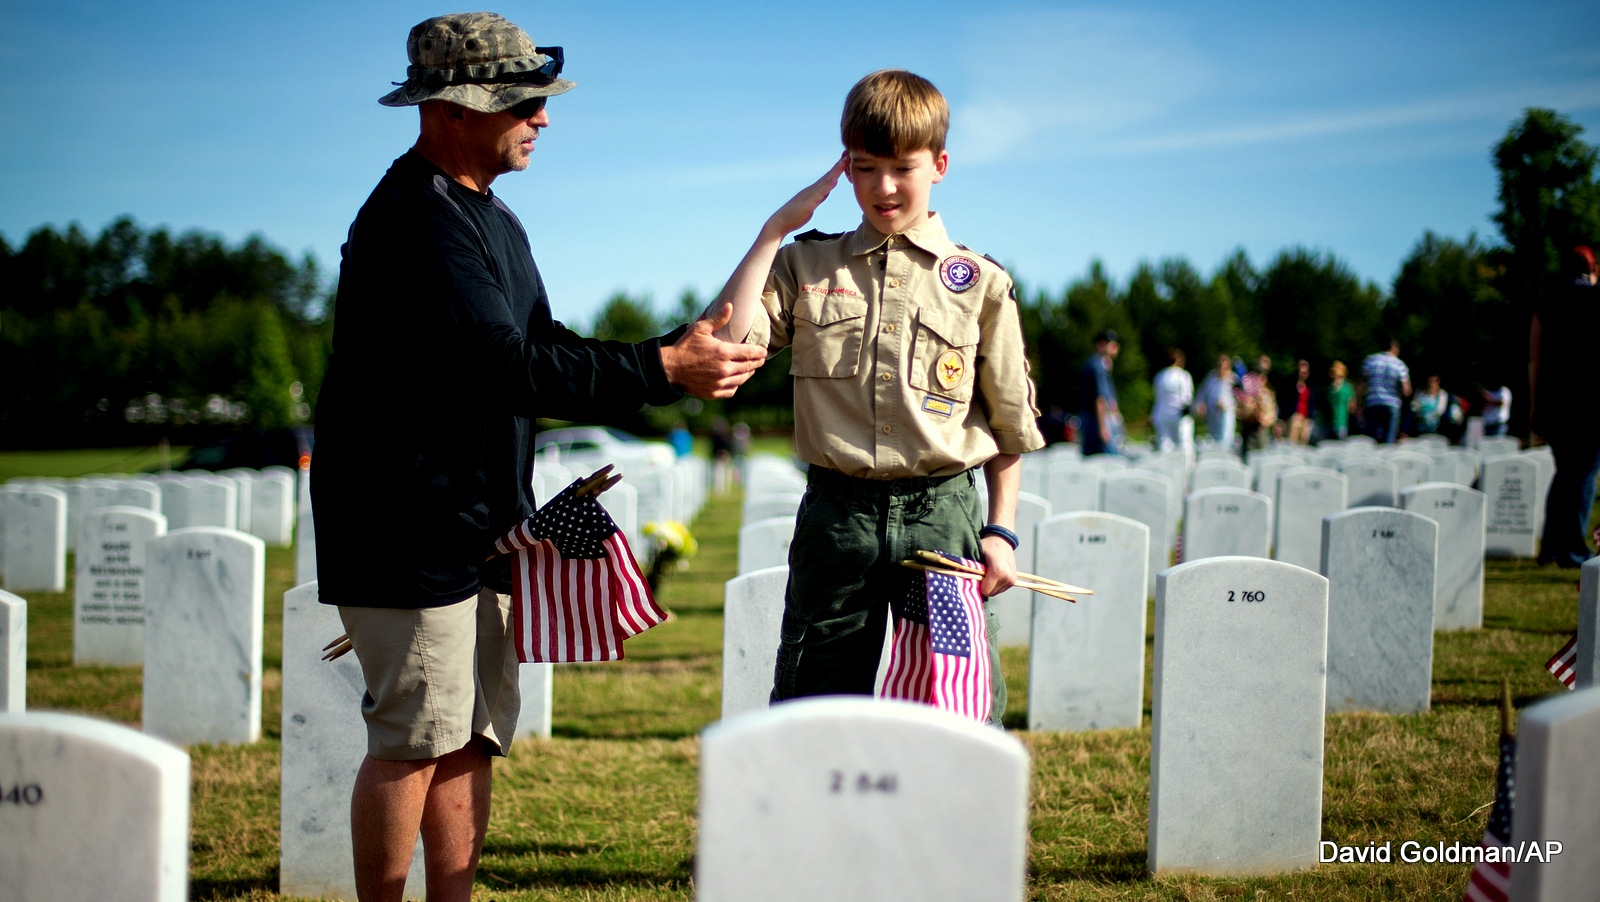 Retired U.S. Air Force Chief Master Sgt. Jackie Powell, left, of Canton, Ga., gives some instruction on saluting to Boy Scout Logan Schell, 12, of Cumming, Ga., as they place flags at the graves of military service members ahead of the Memorial Day holiday at Georgia National Cemetery, Saturday, May 25, 2013, in Canton, Ga.